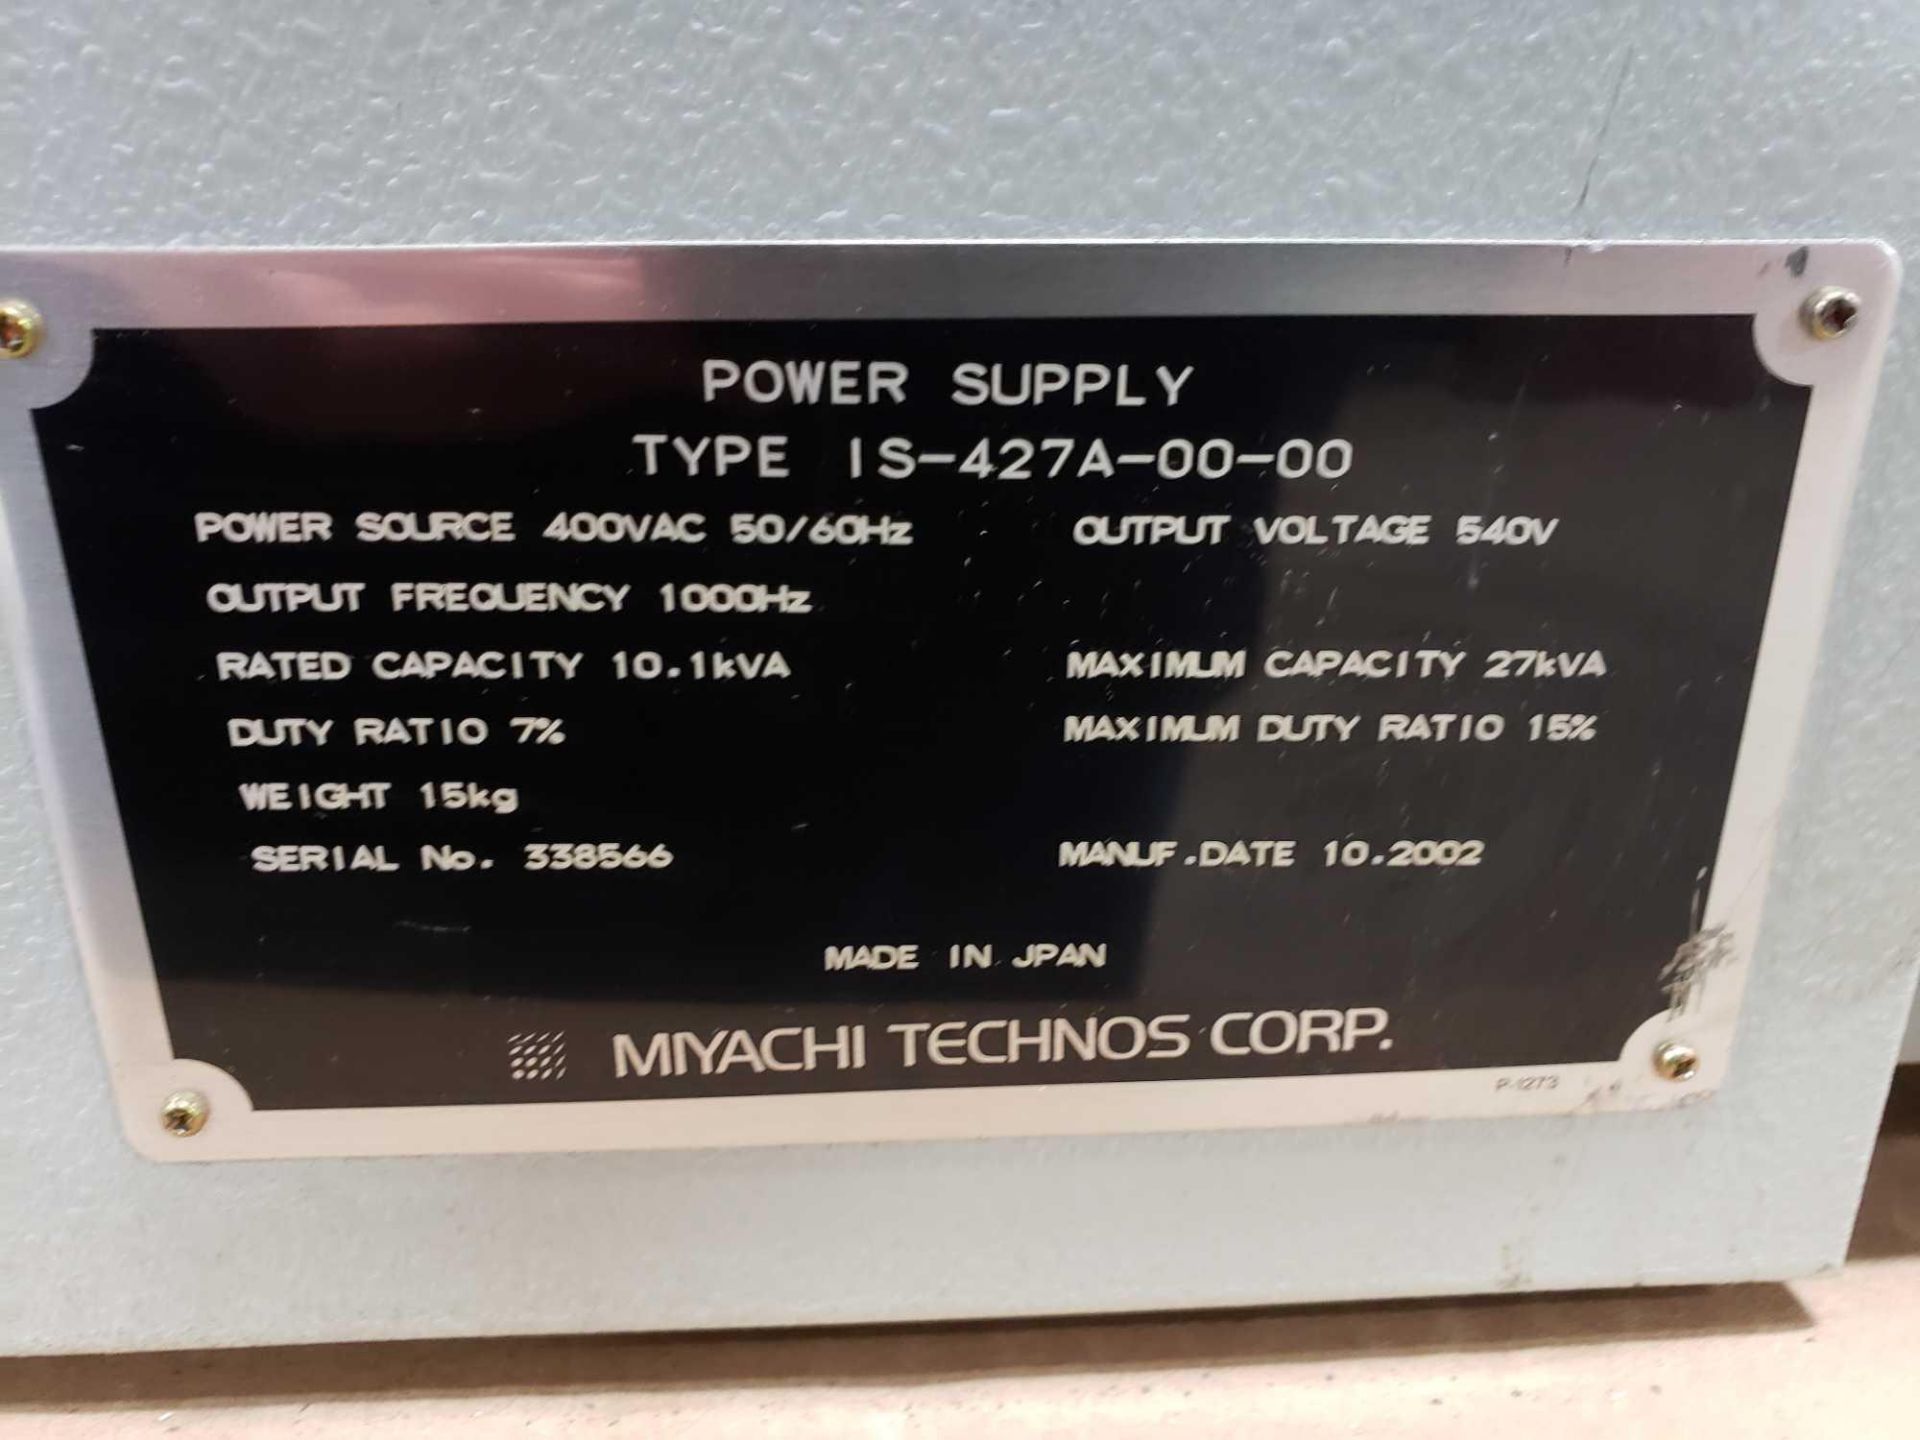 Miyachi Inverter Welding power supply model type IS-427A-00-OO. 27kVa. - Image 3 of 3